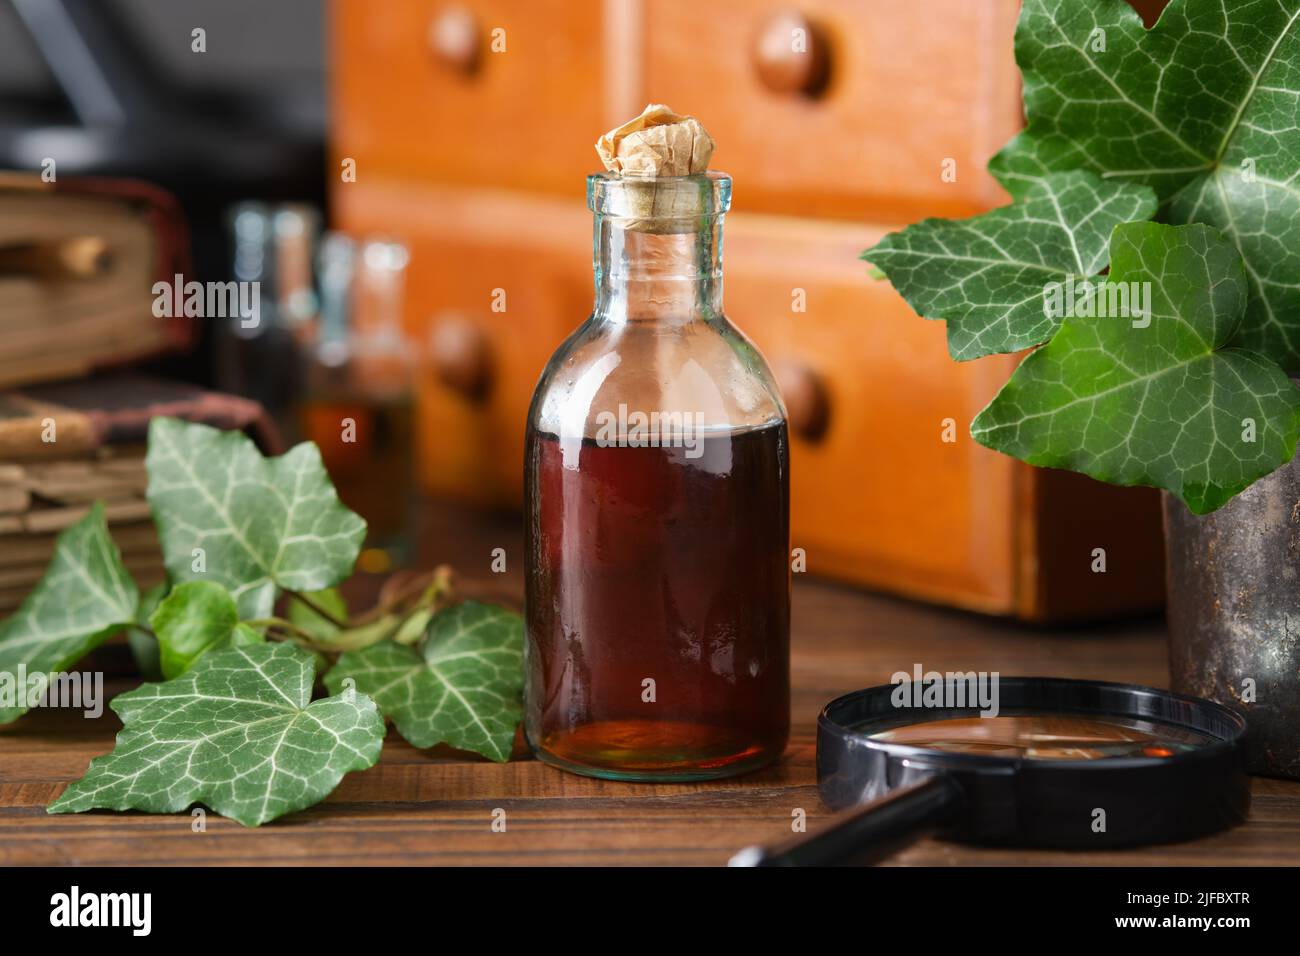 Bottle of ivy leaf syrup or cough tincture. Ivy leaves extract bottle and wooden medicine cabinet with apothecary remedies, old books on background. A Stock Photo